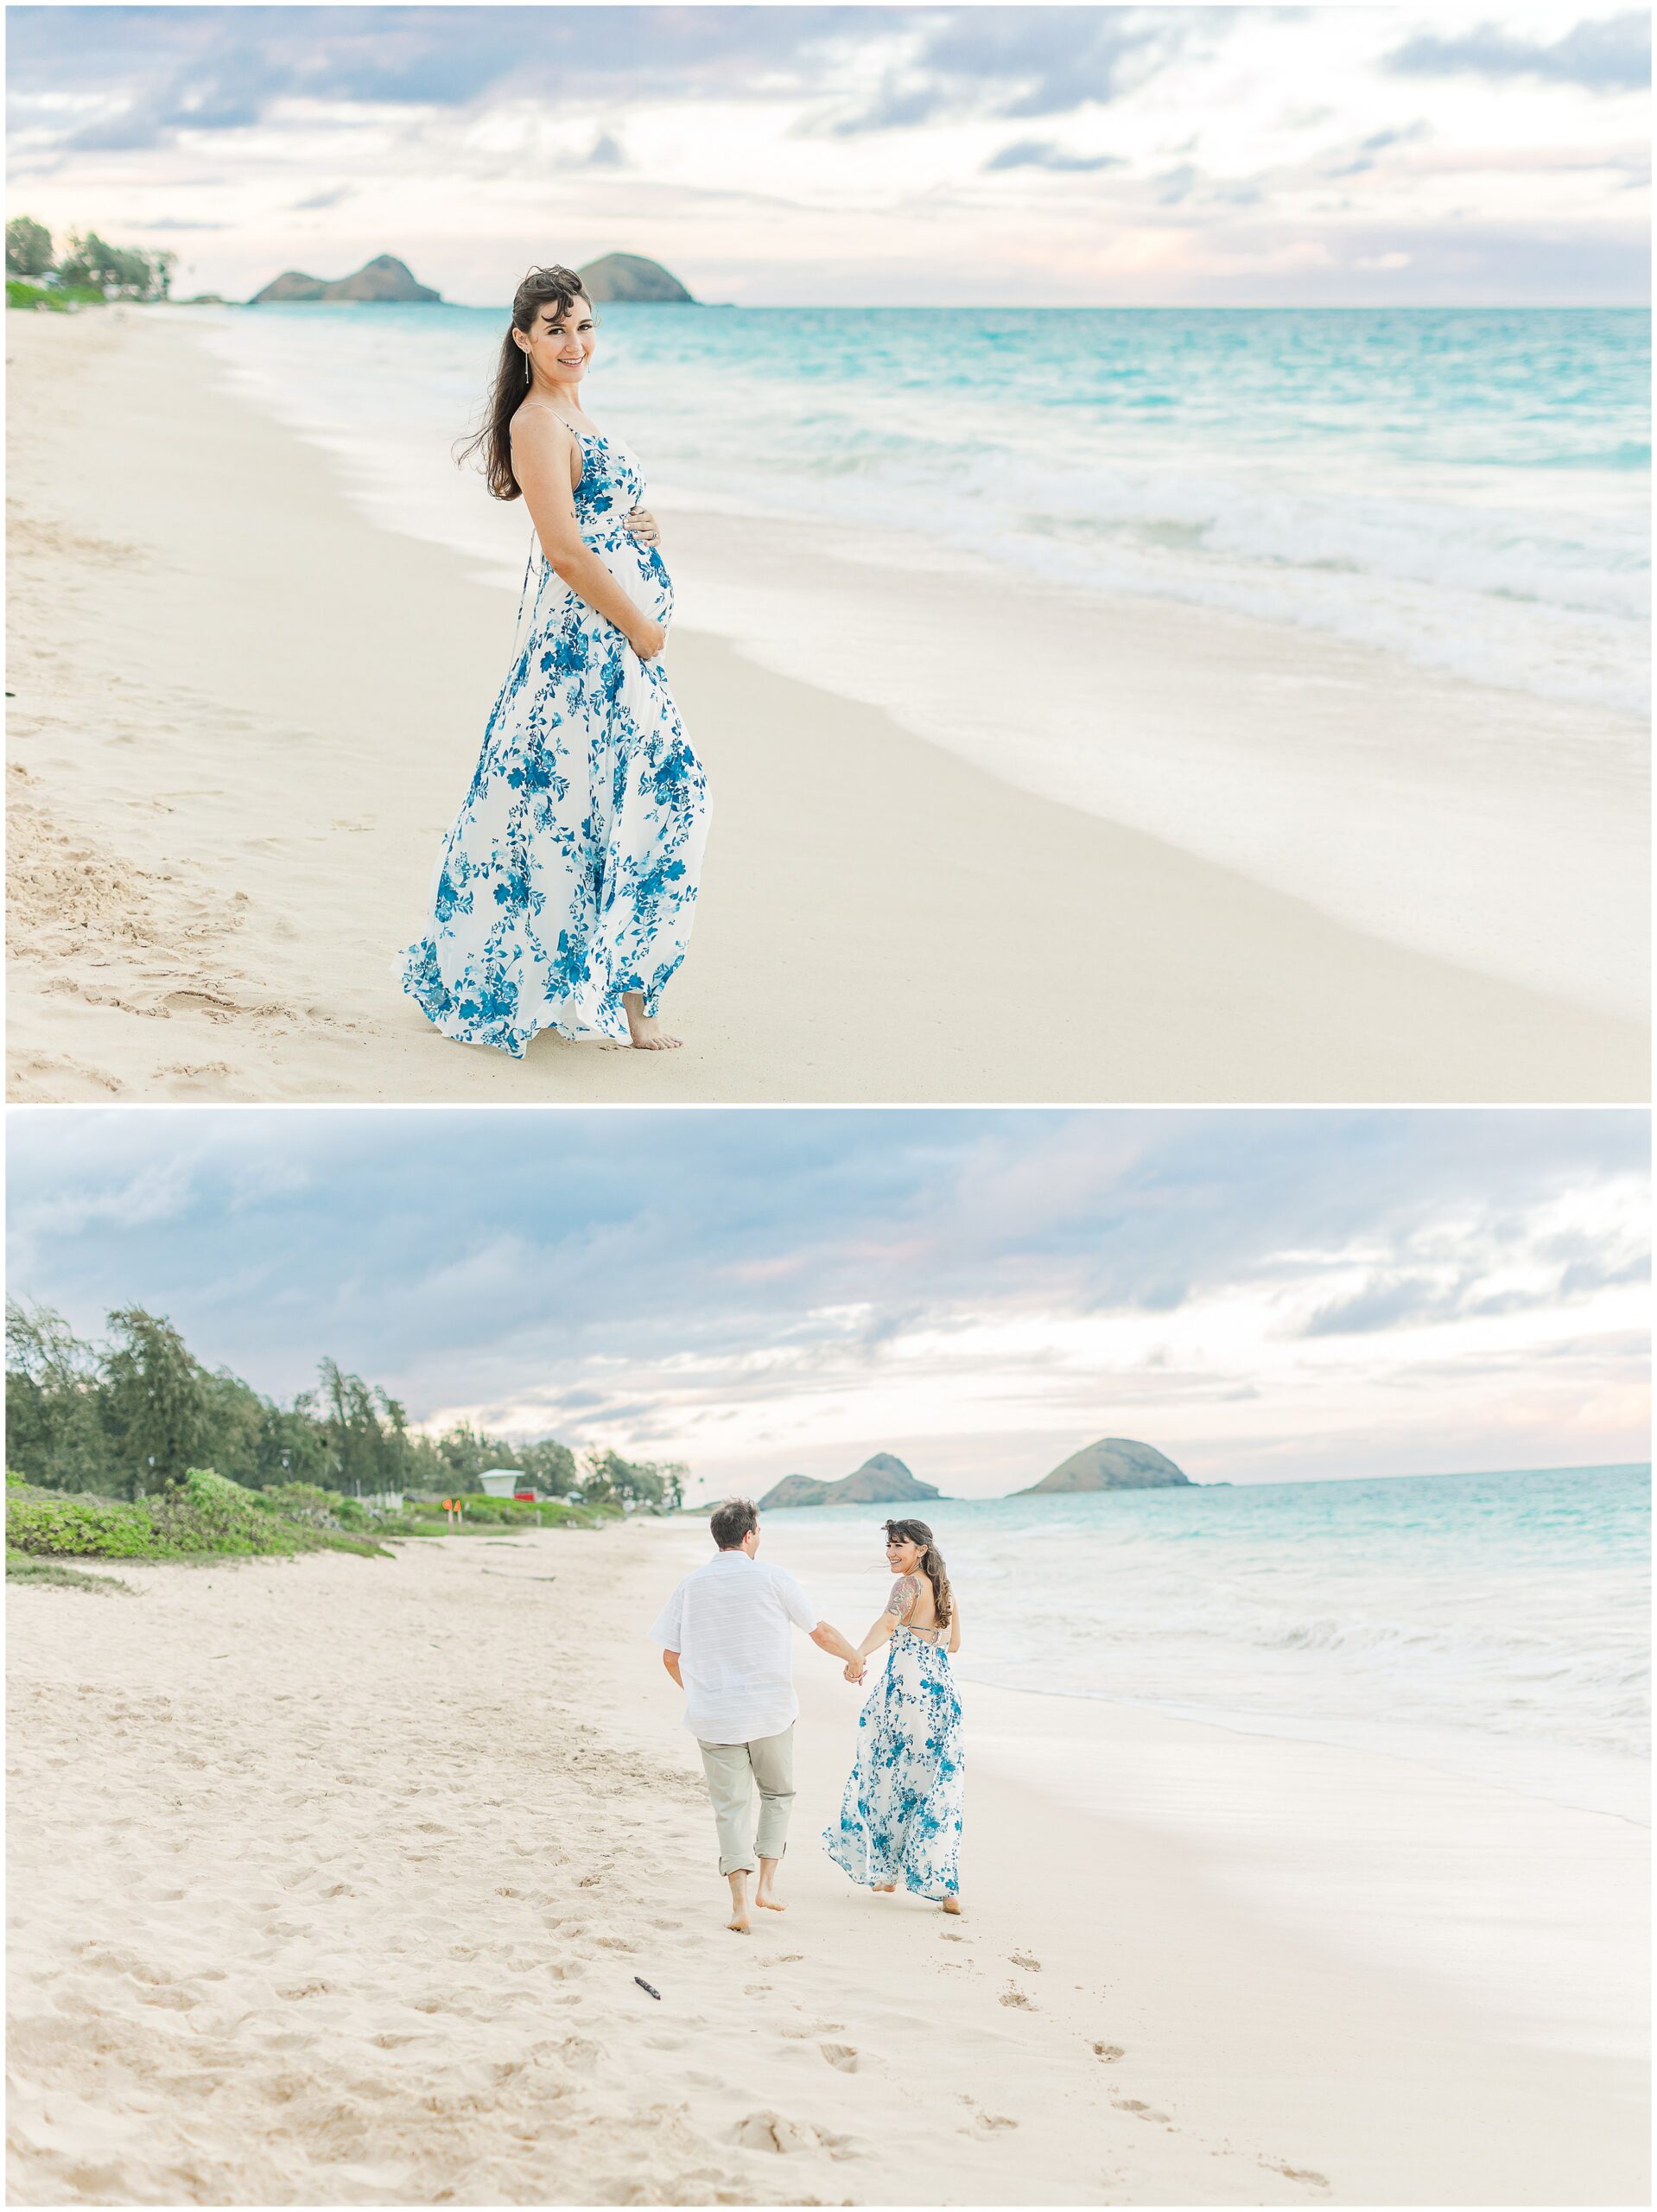 top: solo portrait of expecting mother standing on the sand smiling at the camera with two small islands in the distance. bottom: expecting parents frolicking on the beach with two small islands in the distance.